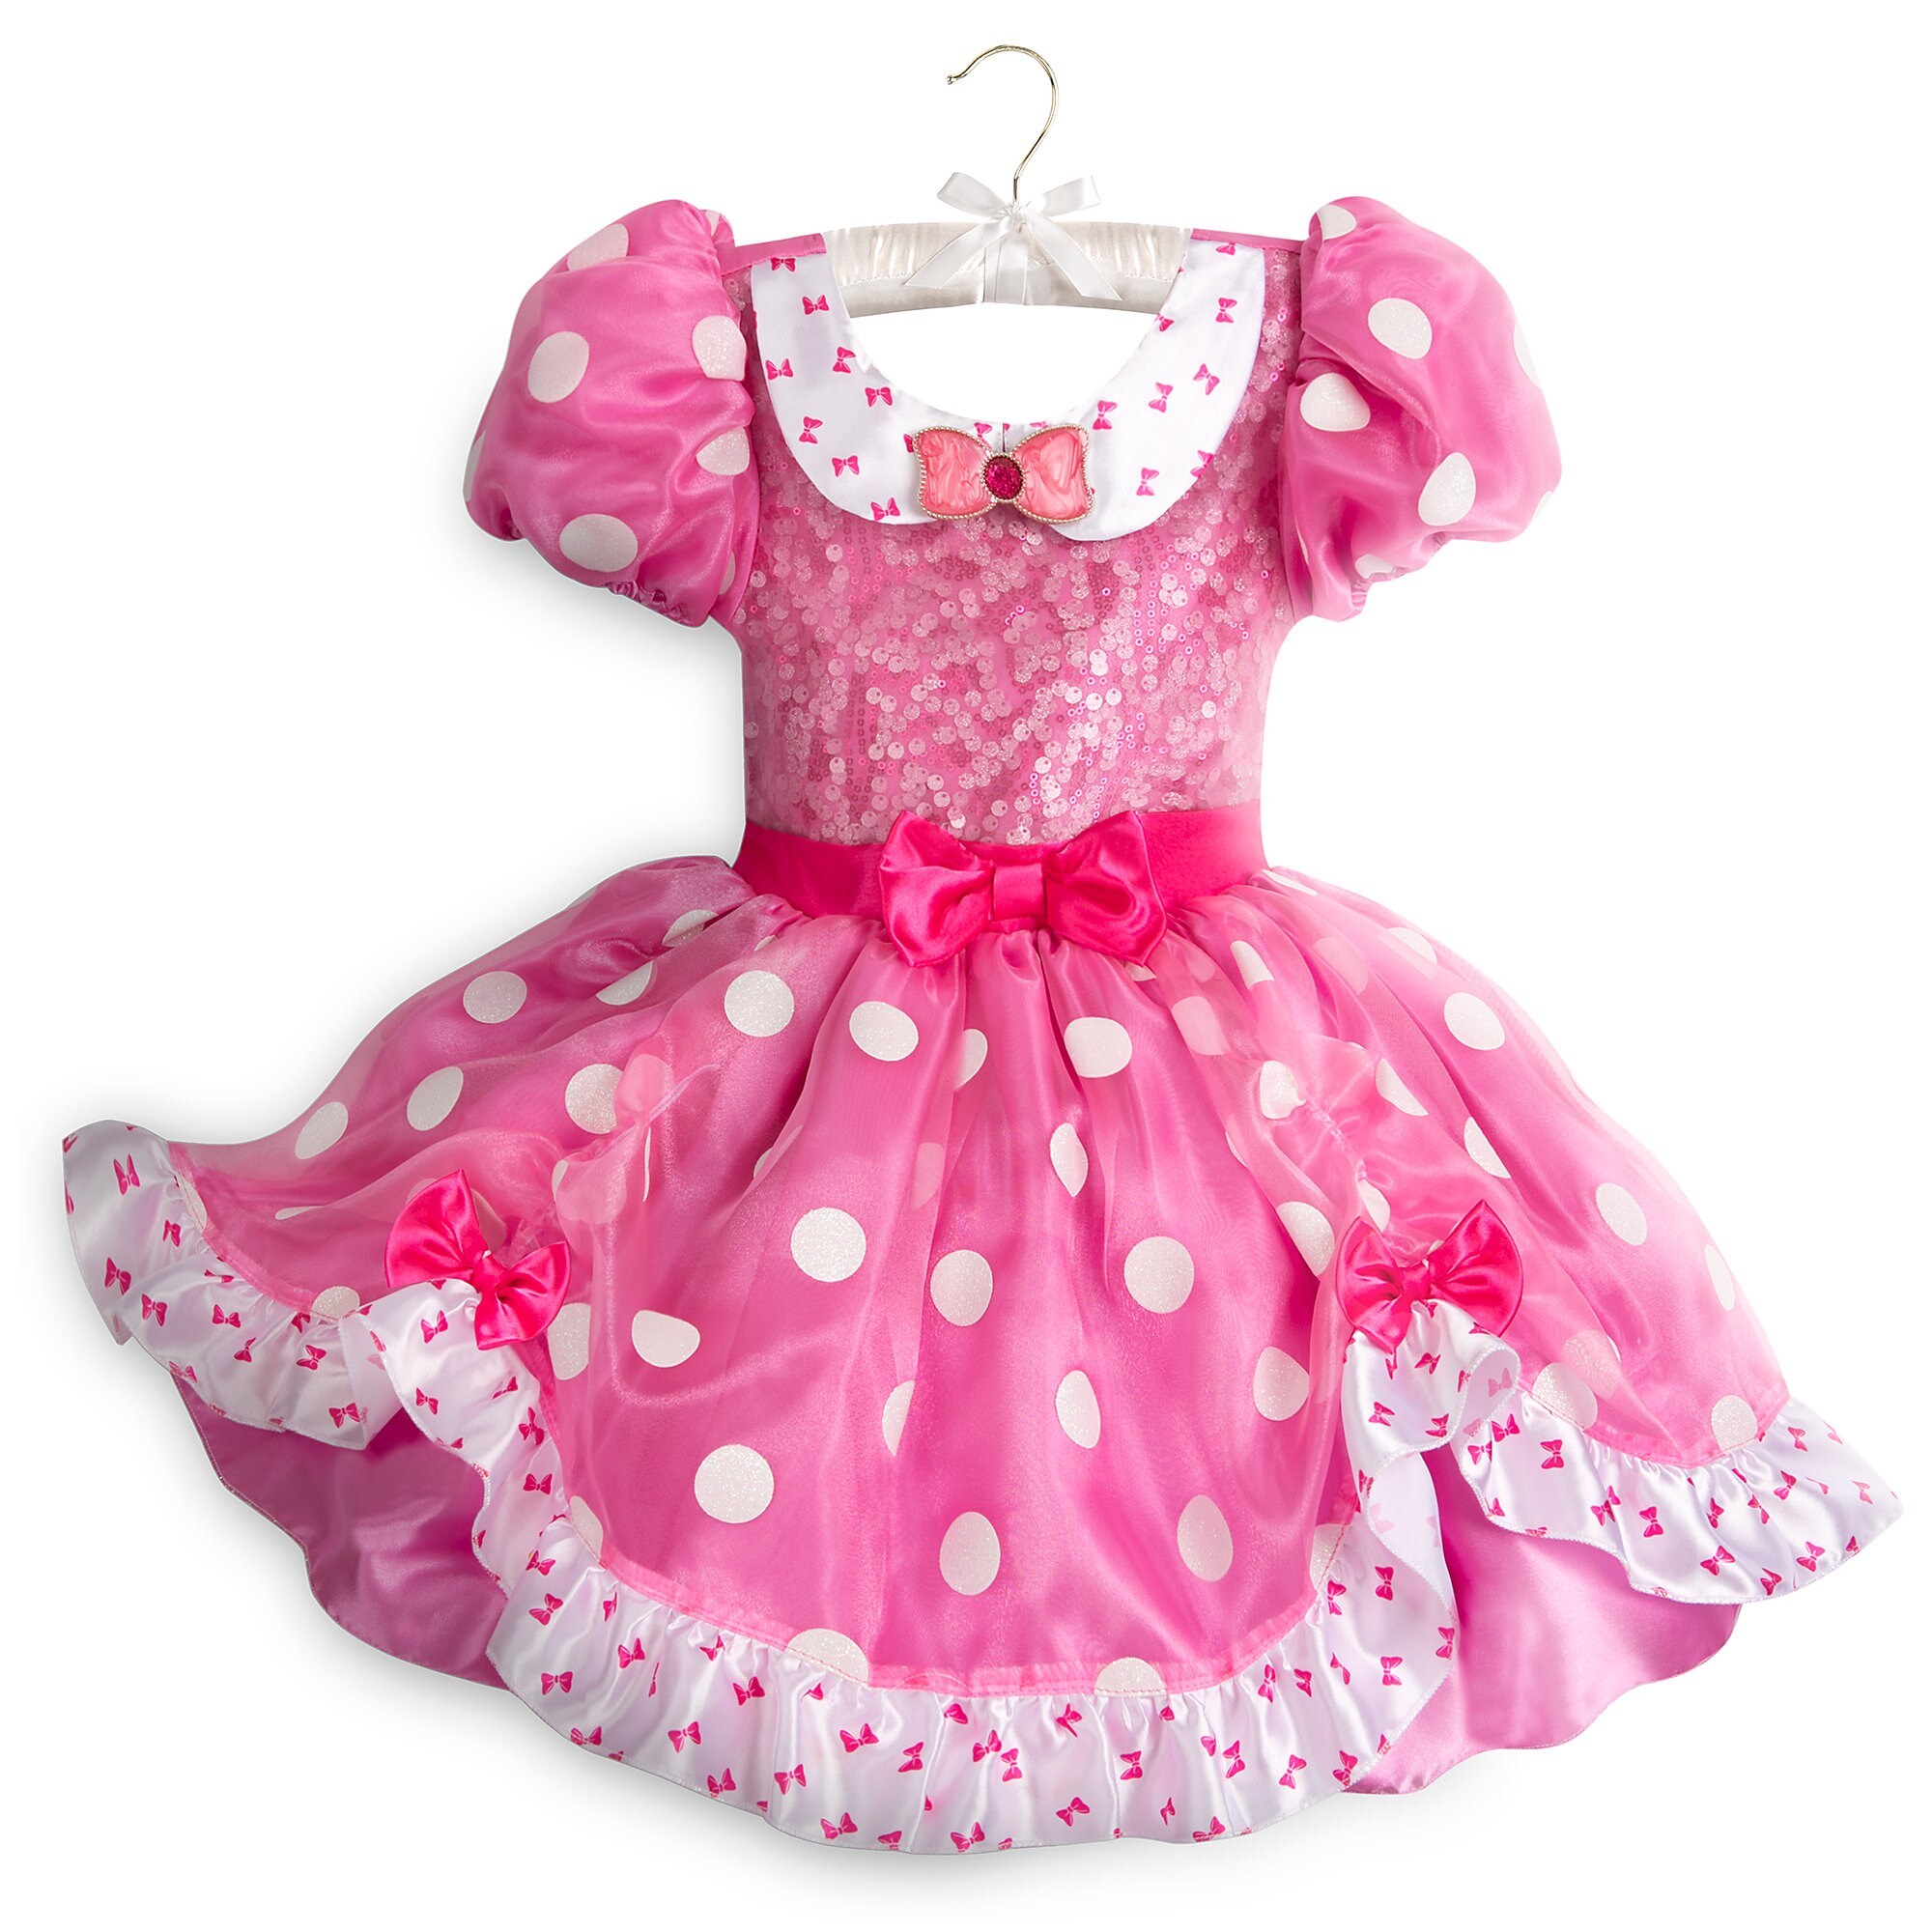 Minnie Mouse Costume for Kids - Pink